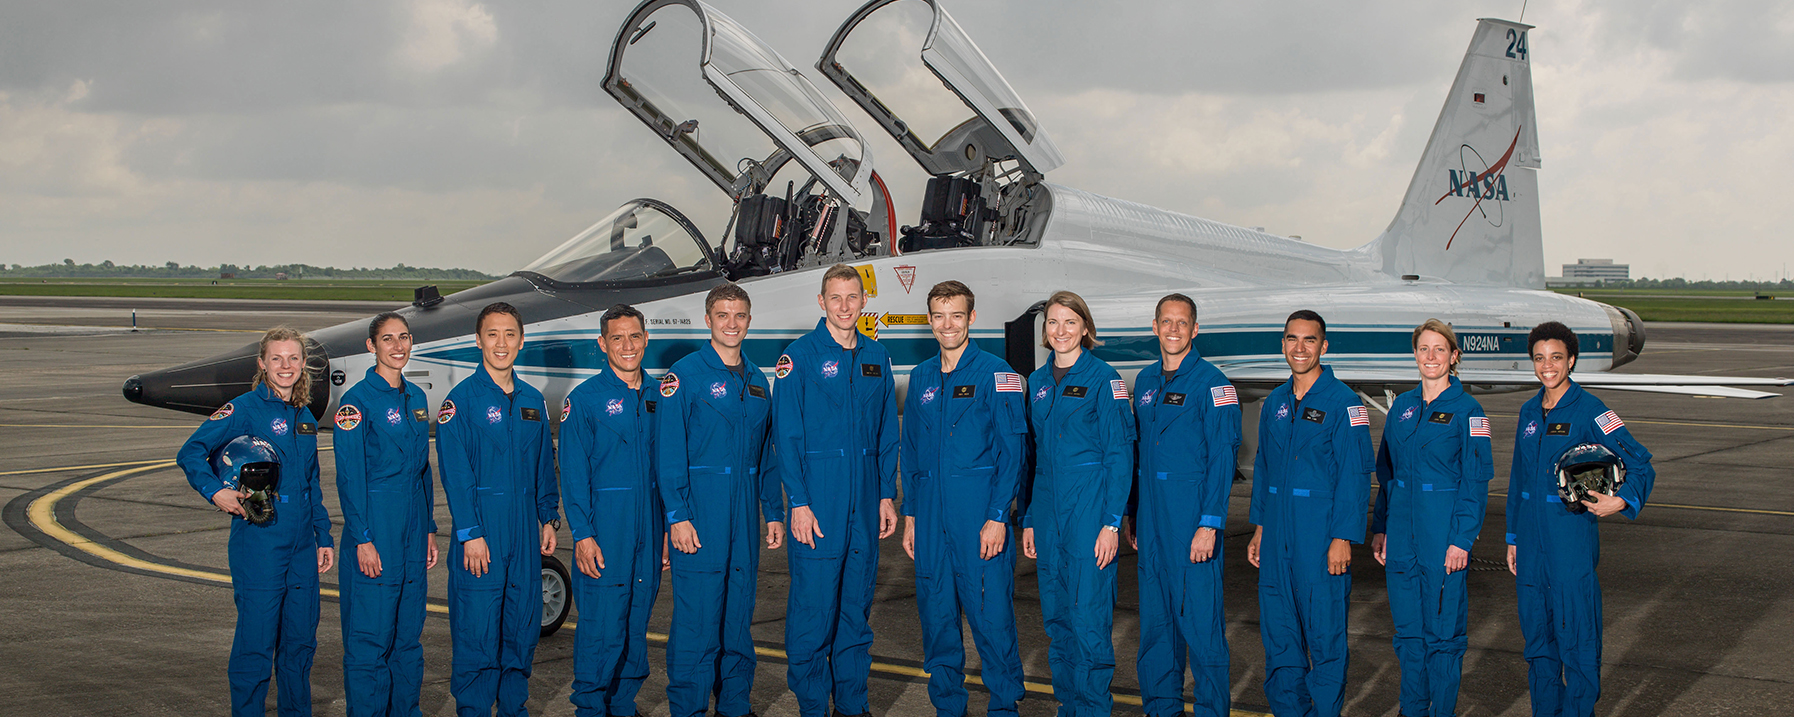 The 2017 Astronaut Class Poses in front of a T-38 Jet